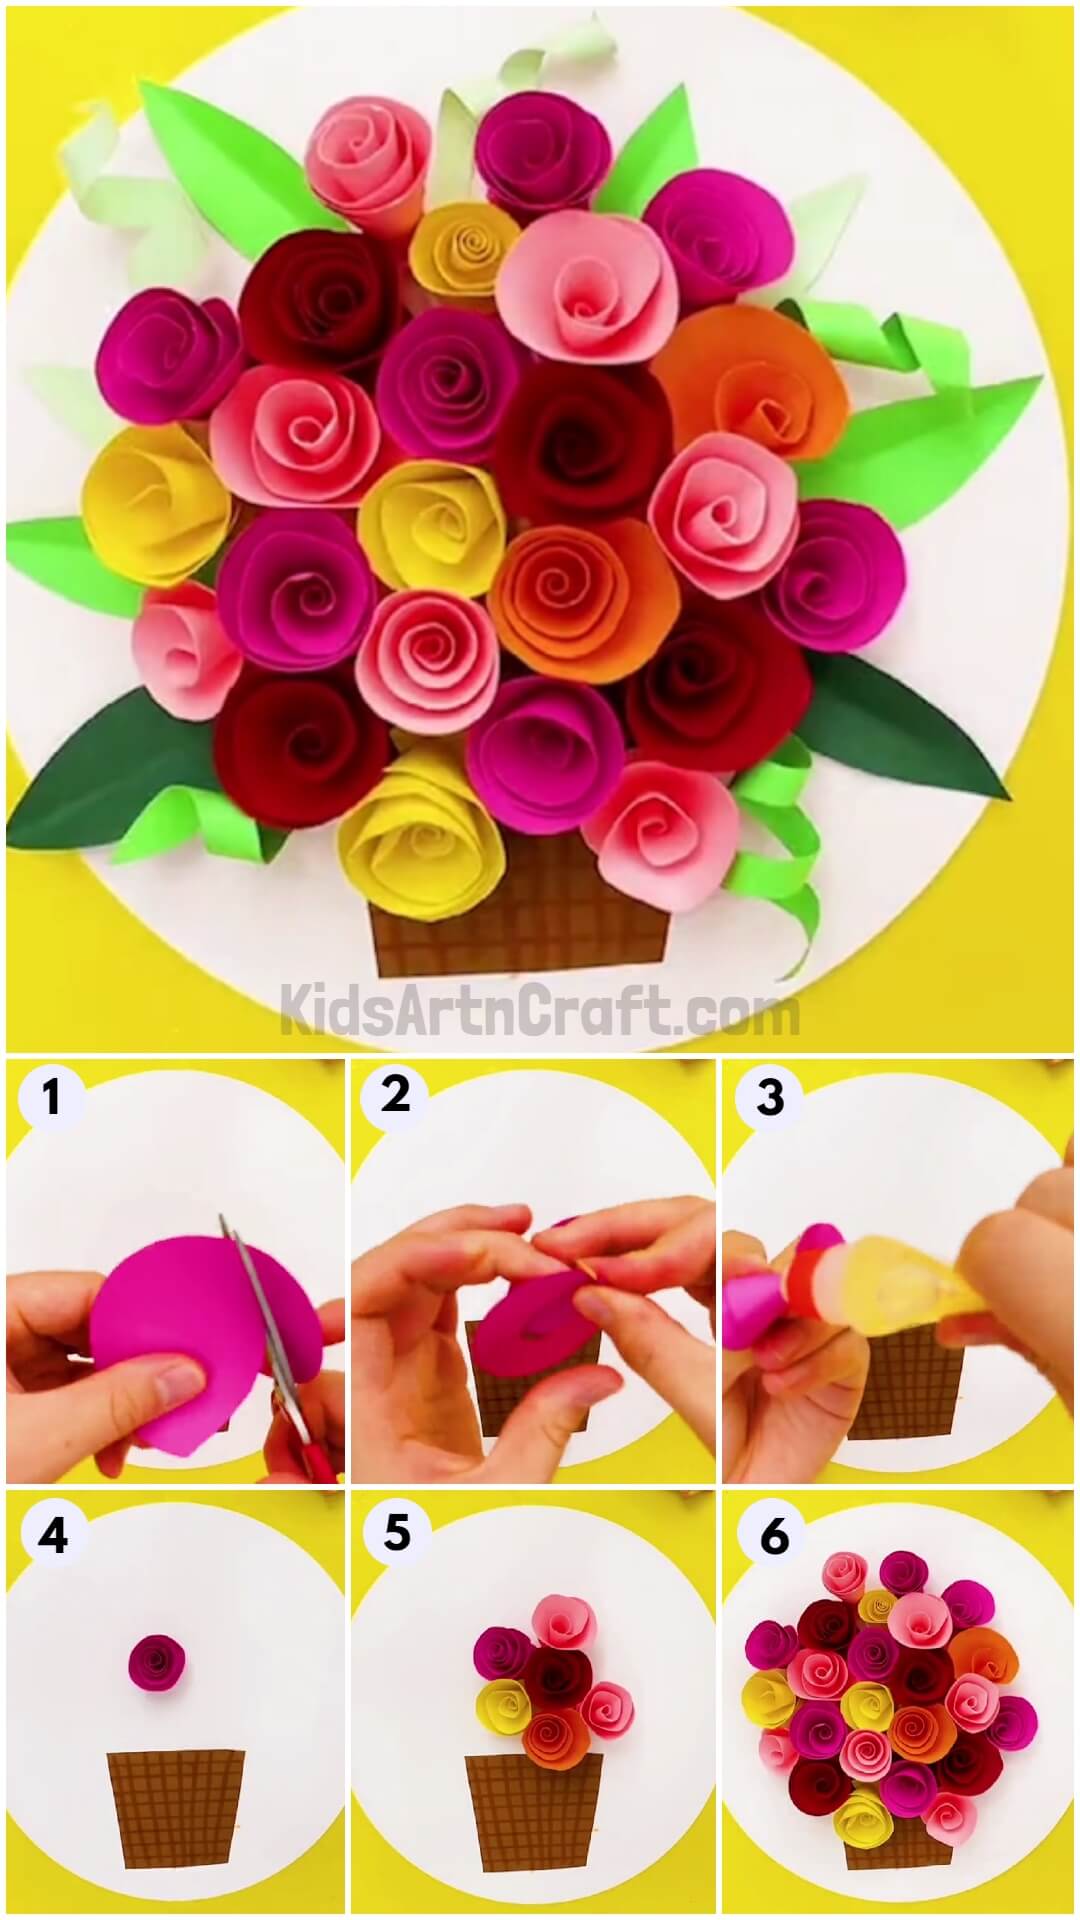  Pretty Roses Flower Pot Paper Craft Idea For Beginners- An Attractive Rose Plant Container Paperwork Project Concept For First-timers 